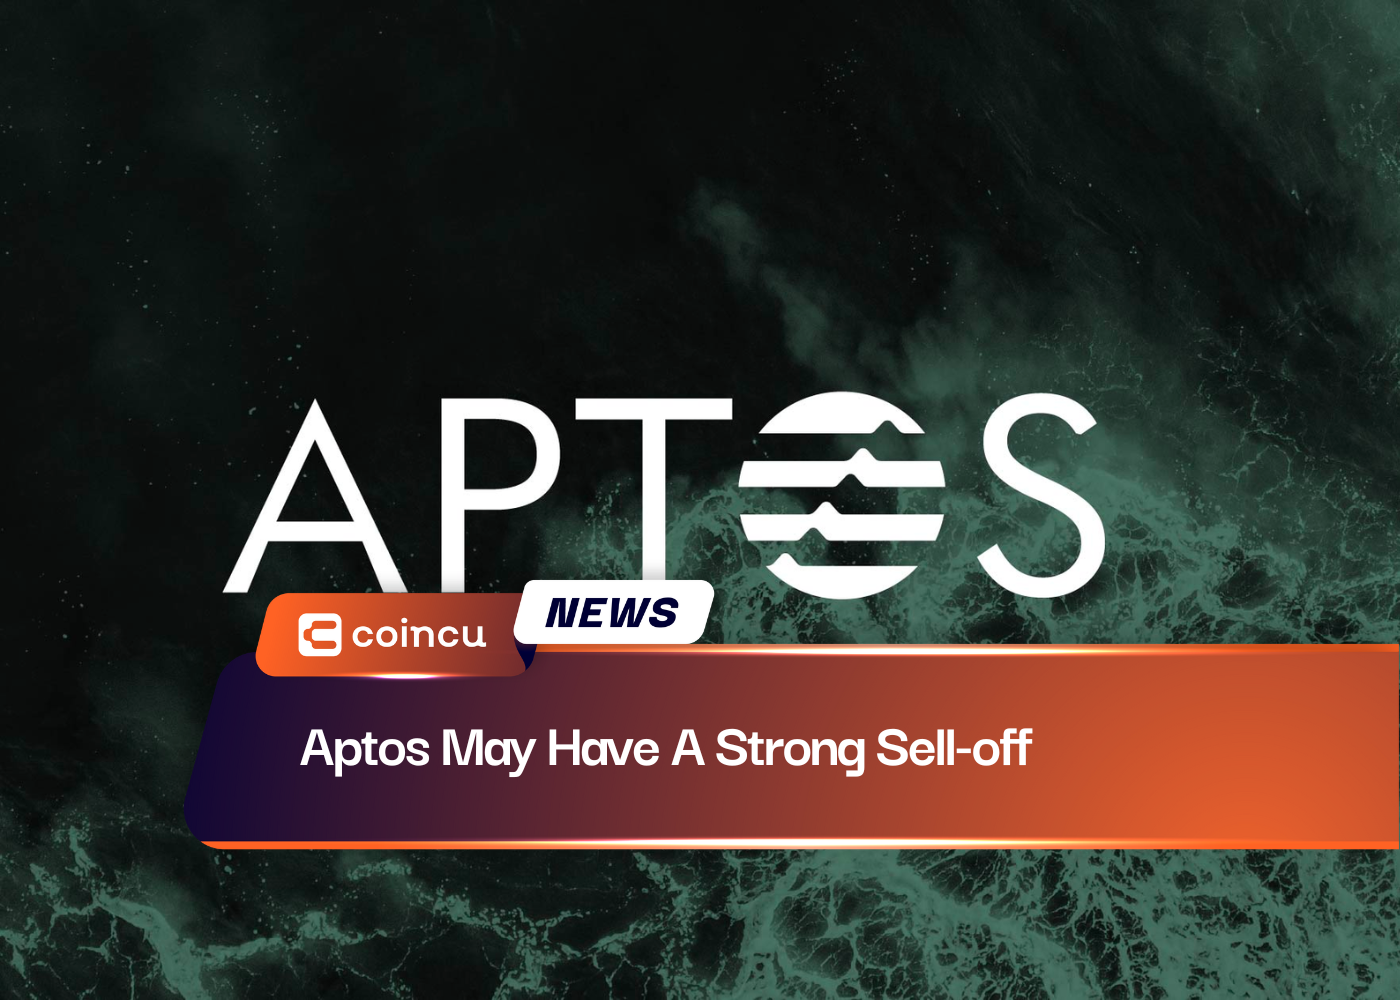 Aptos May Have A Strong Sell-off